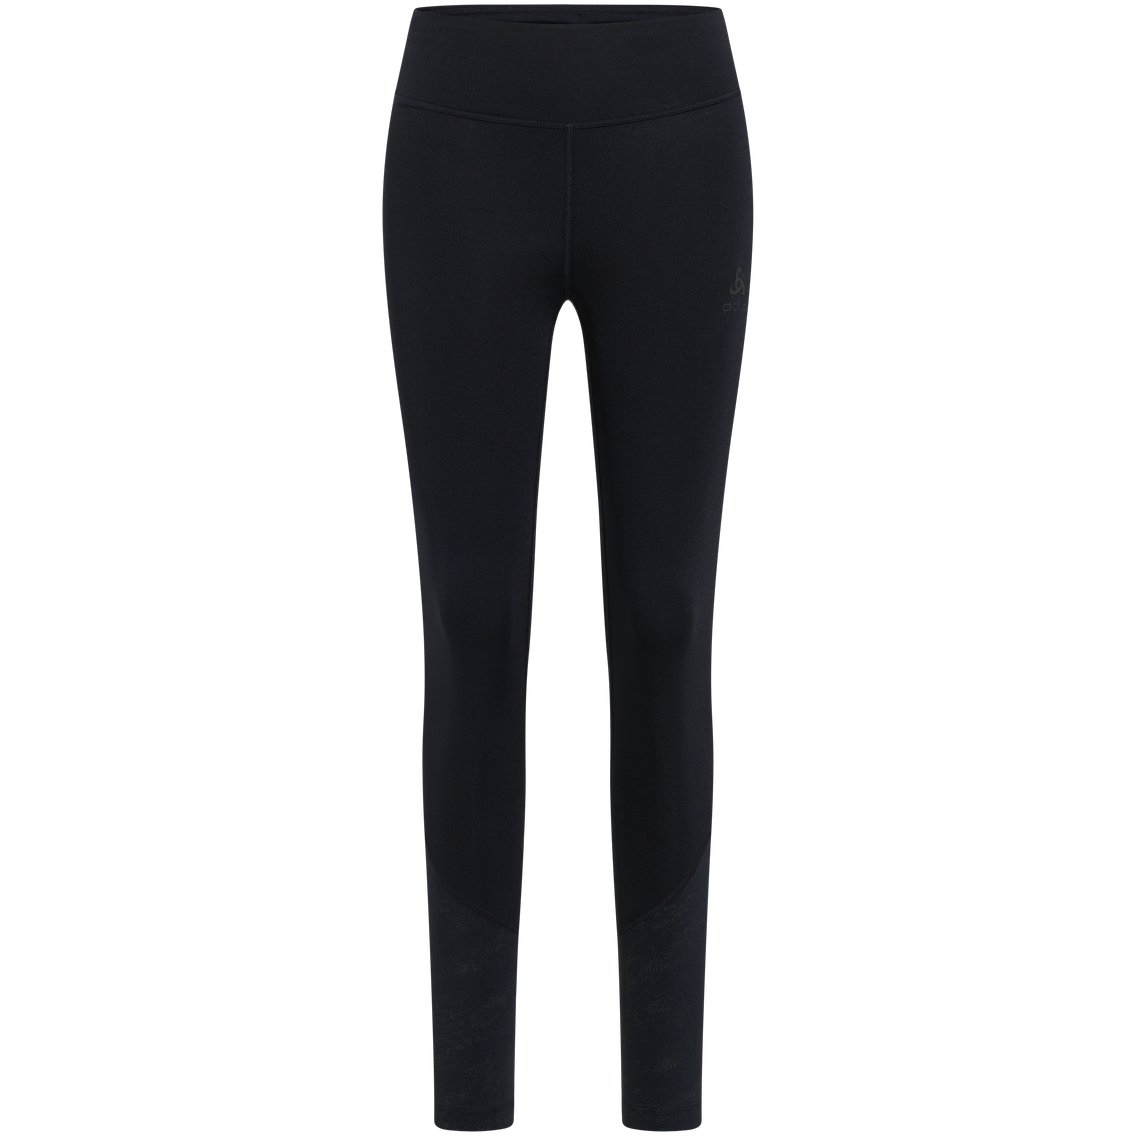 Picture of Odlo Essentials Print Running Tights Women - black